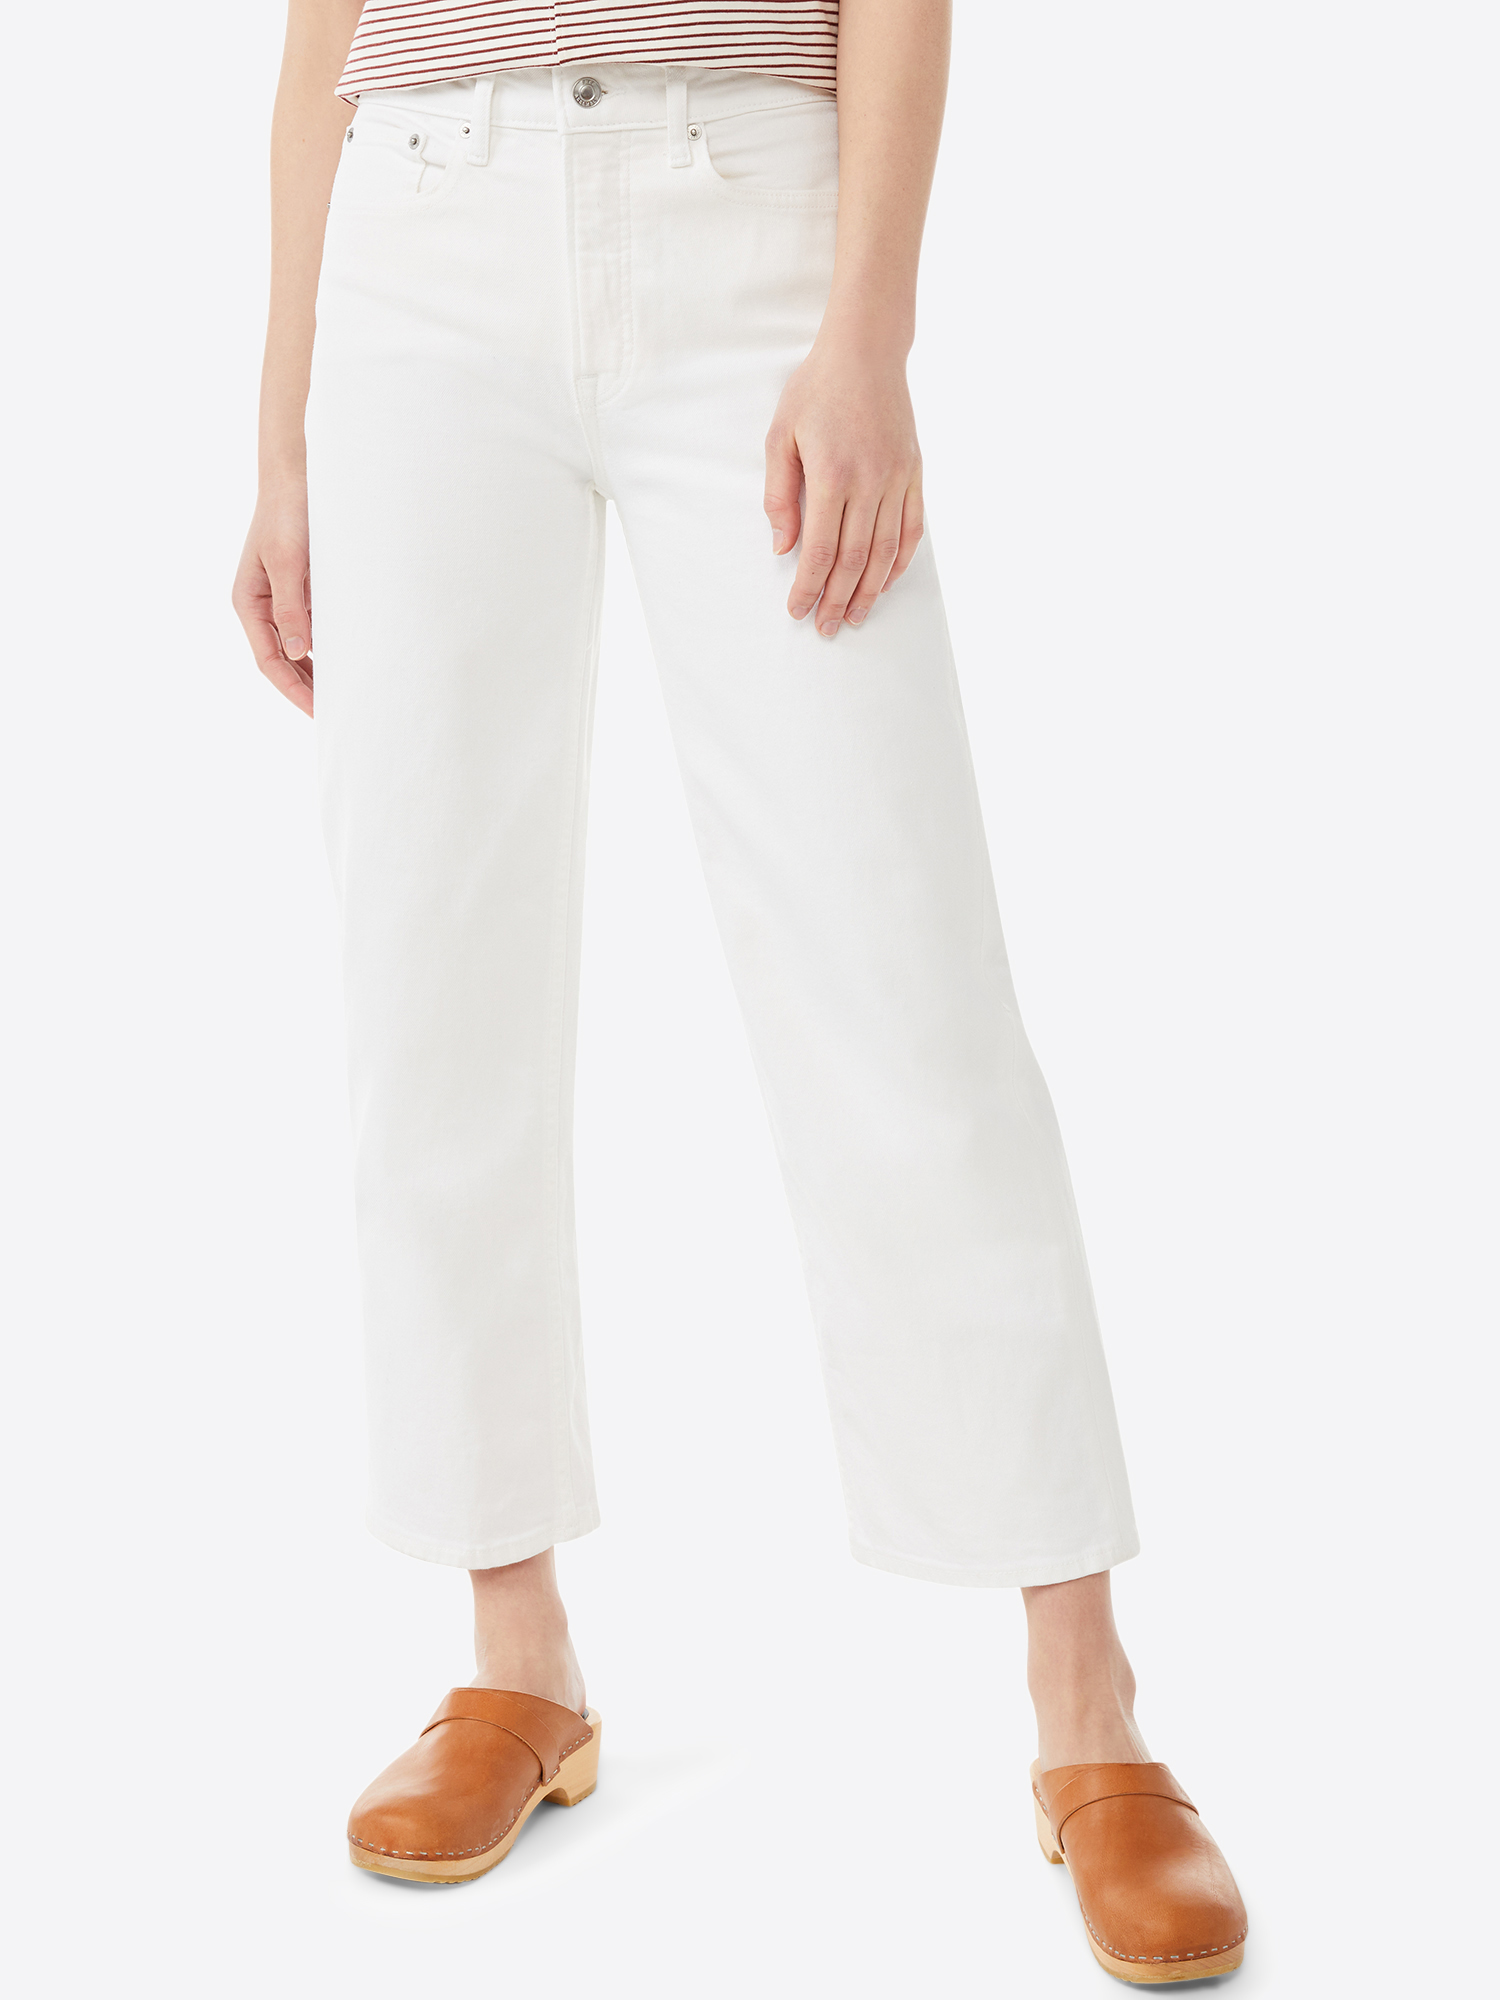 Free Assembly Women's Cropped Wide Straight Jeans - image 1 of 7